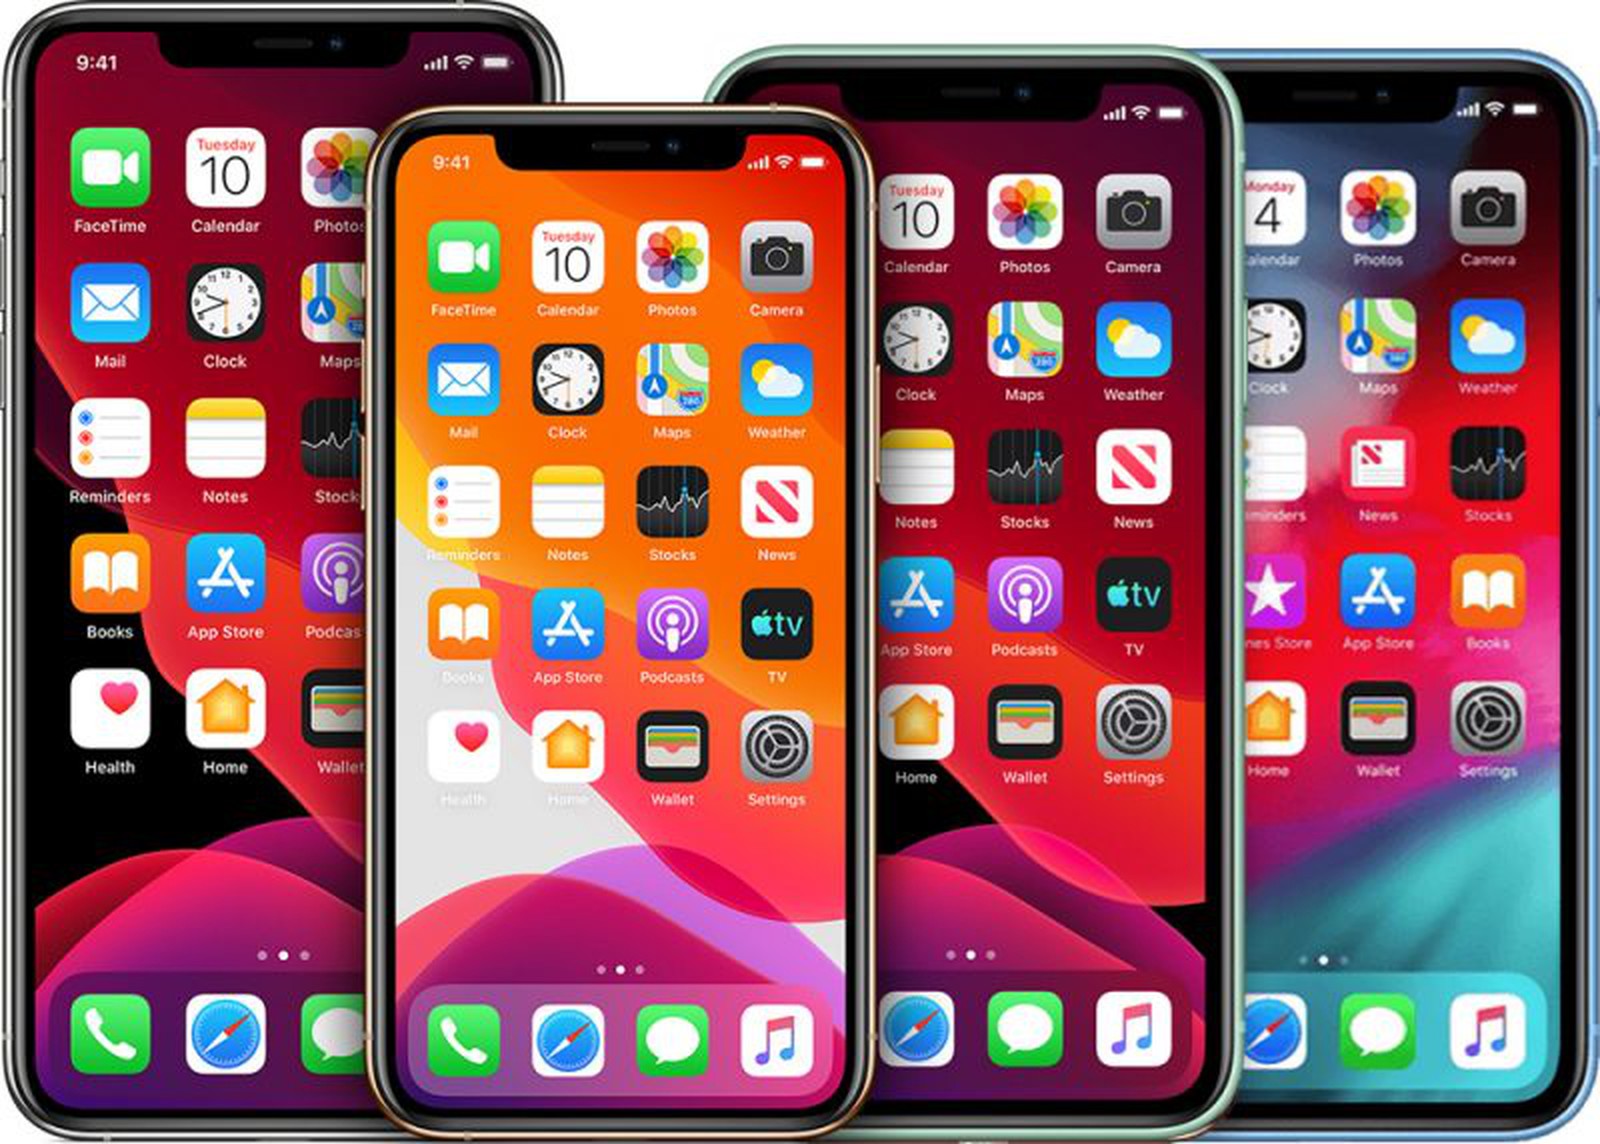 What to Expect From Apple in 2020 New iPhones, Refreshed iPads, Apple